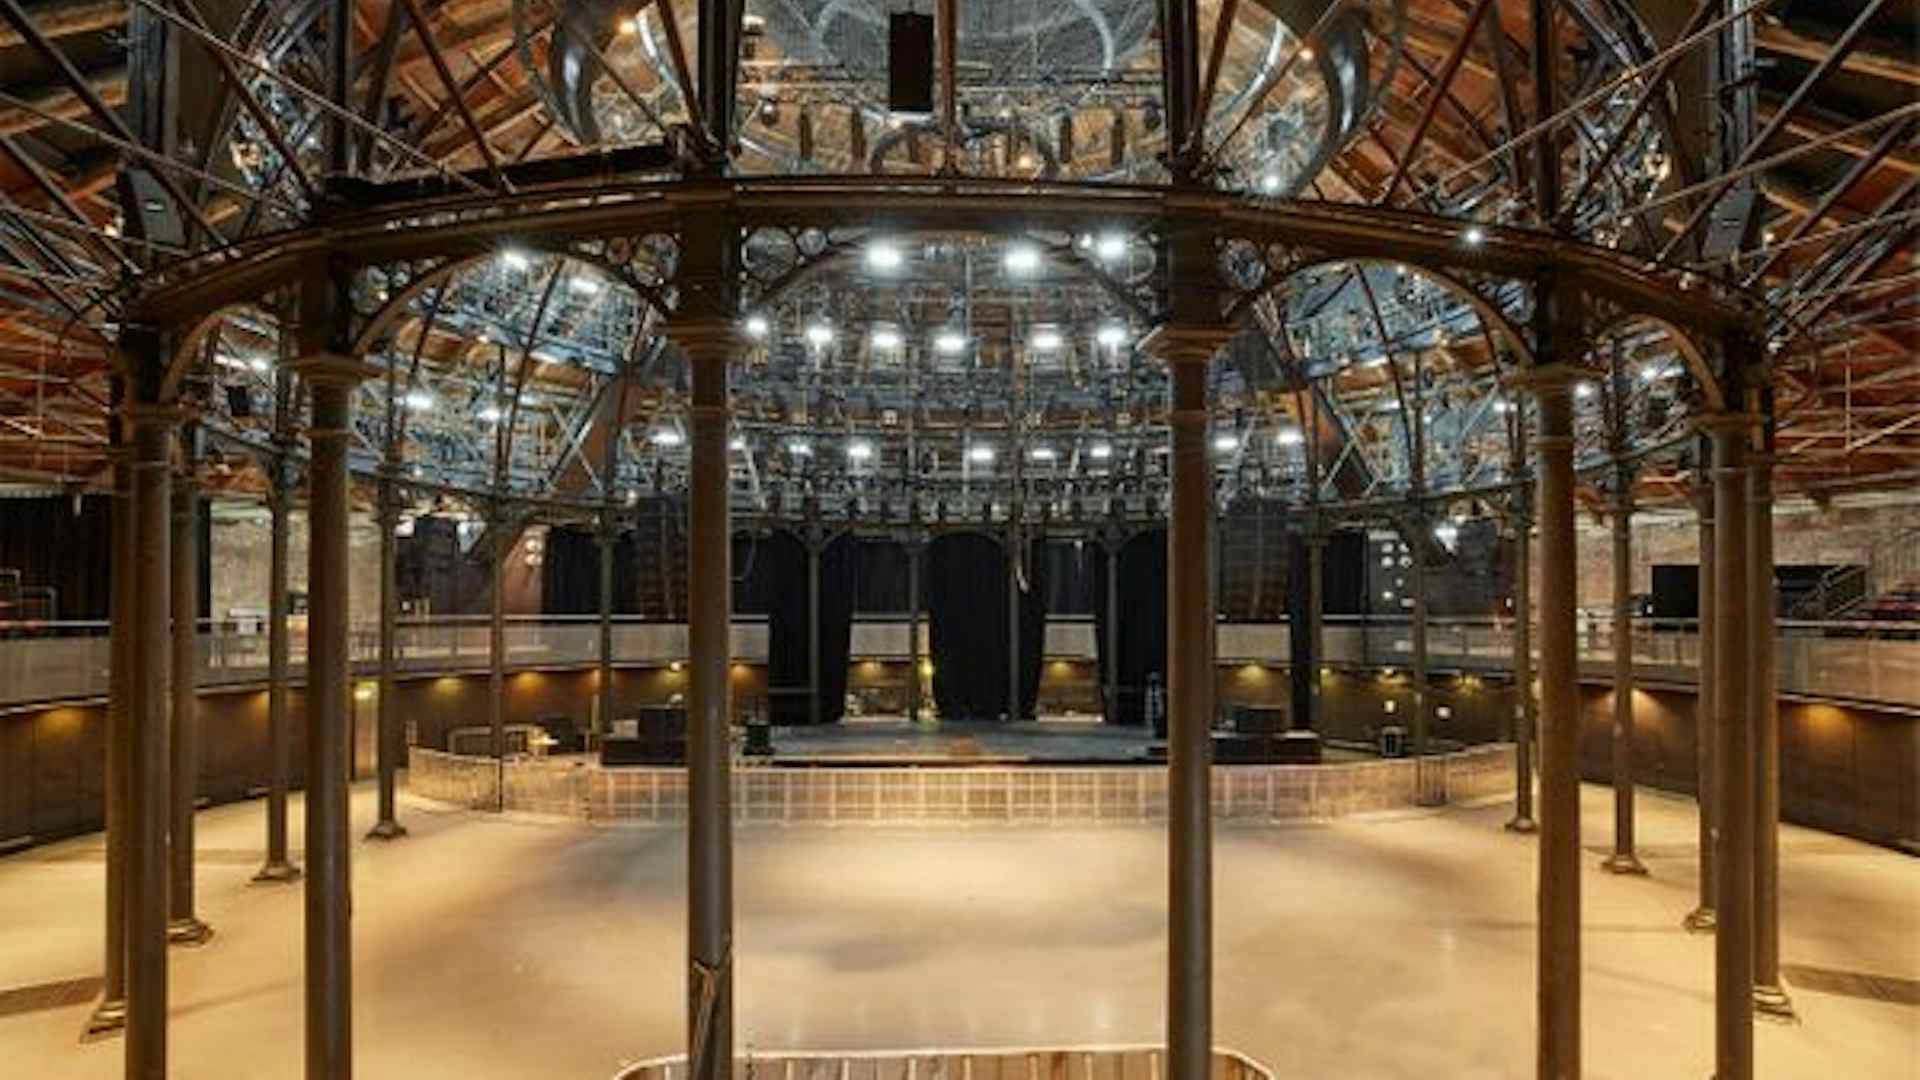 The Remarkable Roundhouse